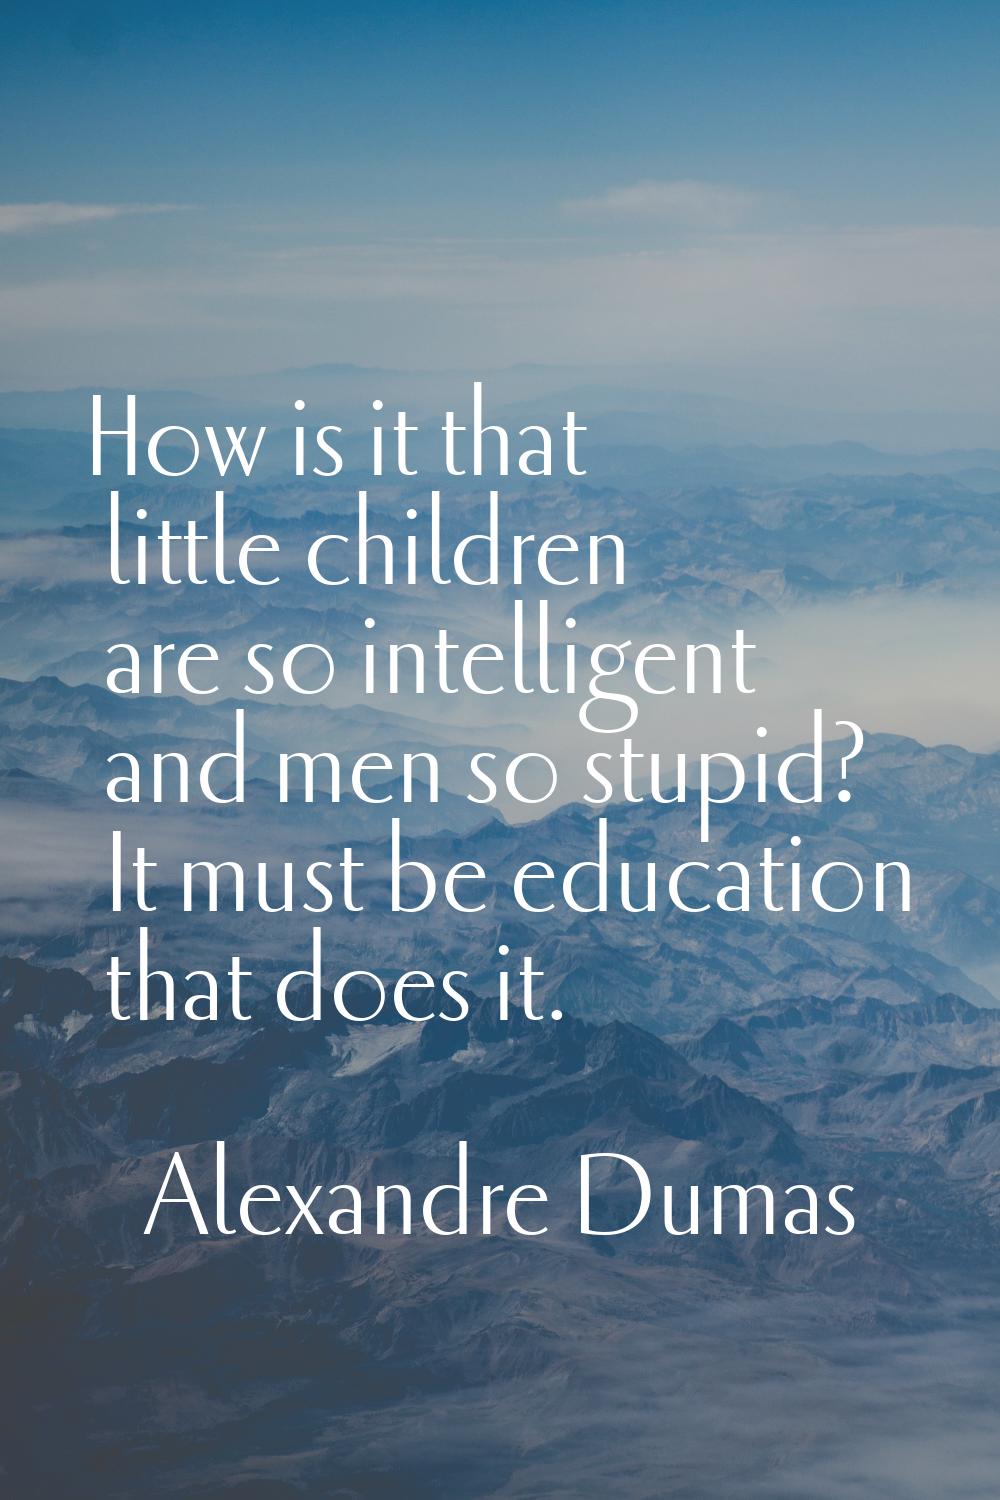 How is it that little children are so intelligent and men so stupid? It must be education that does